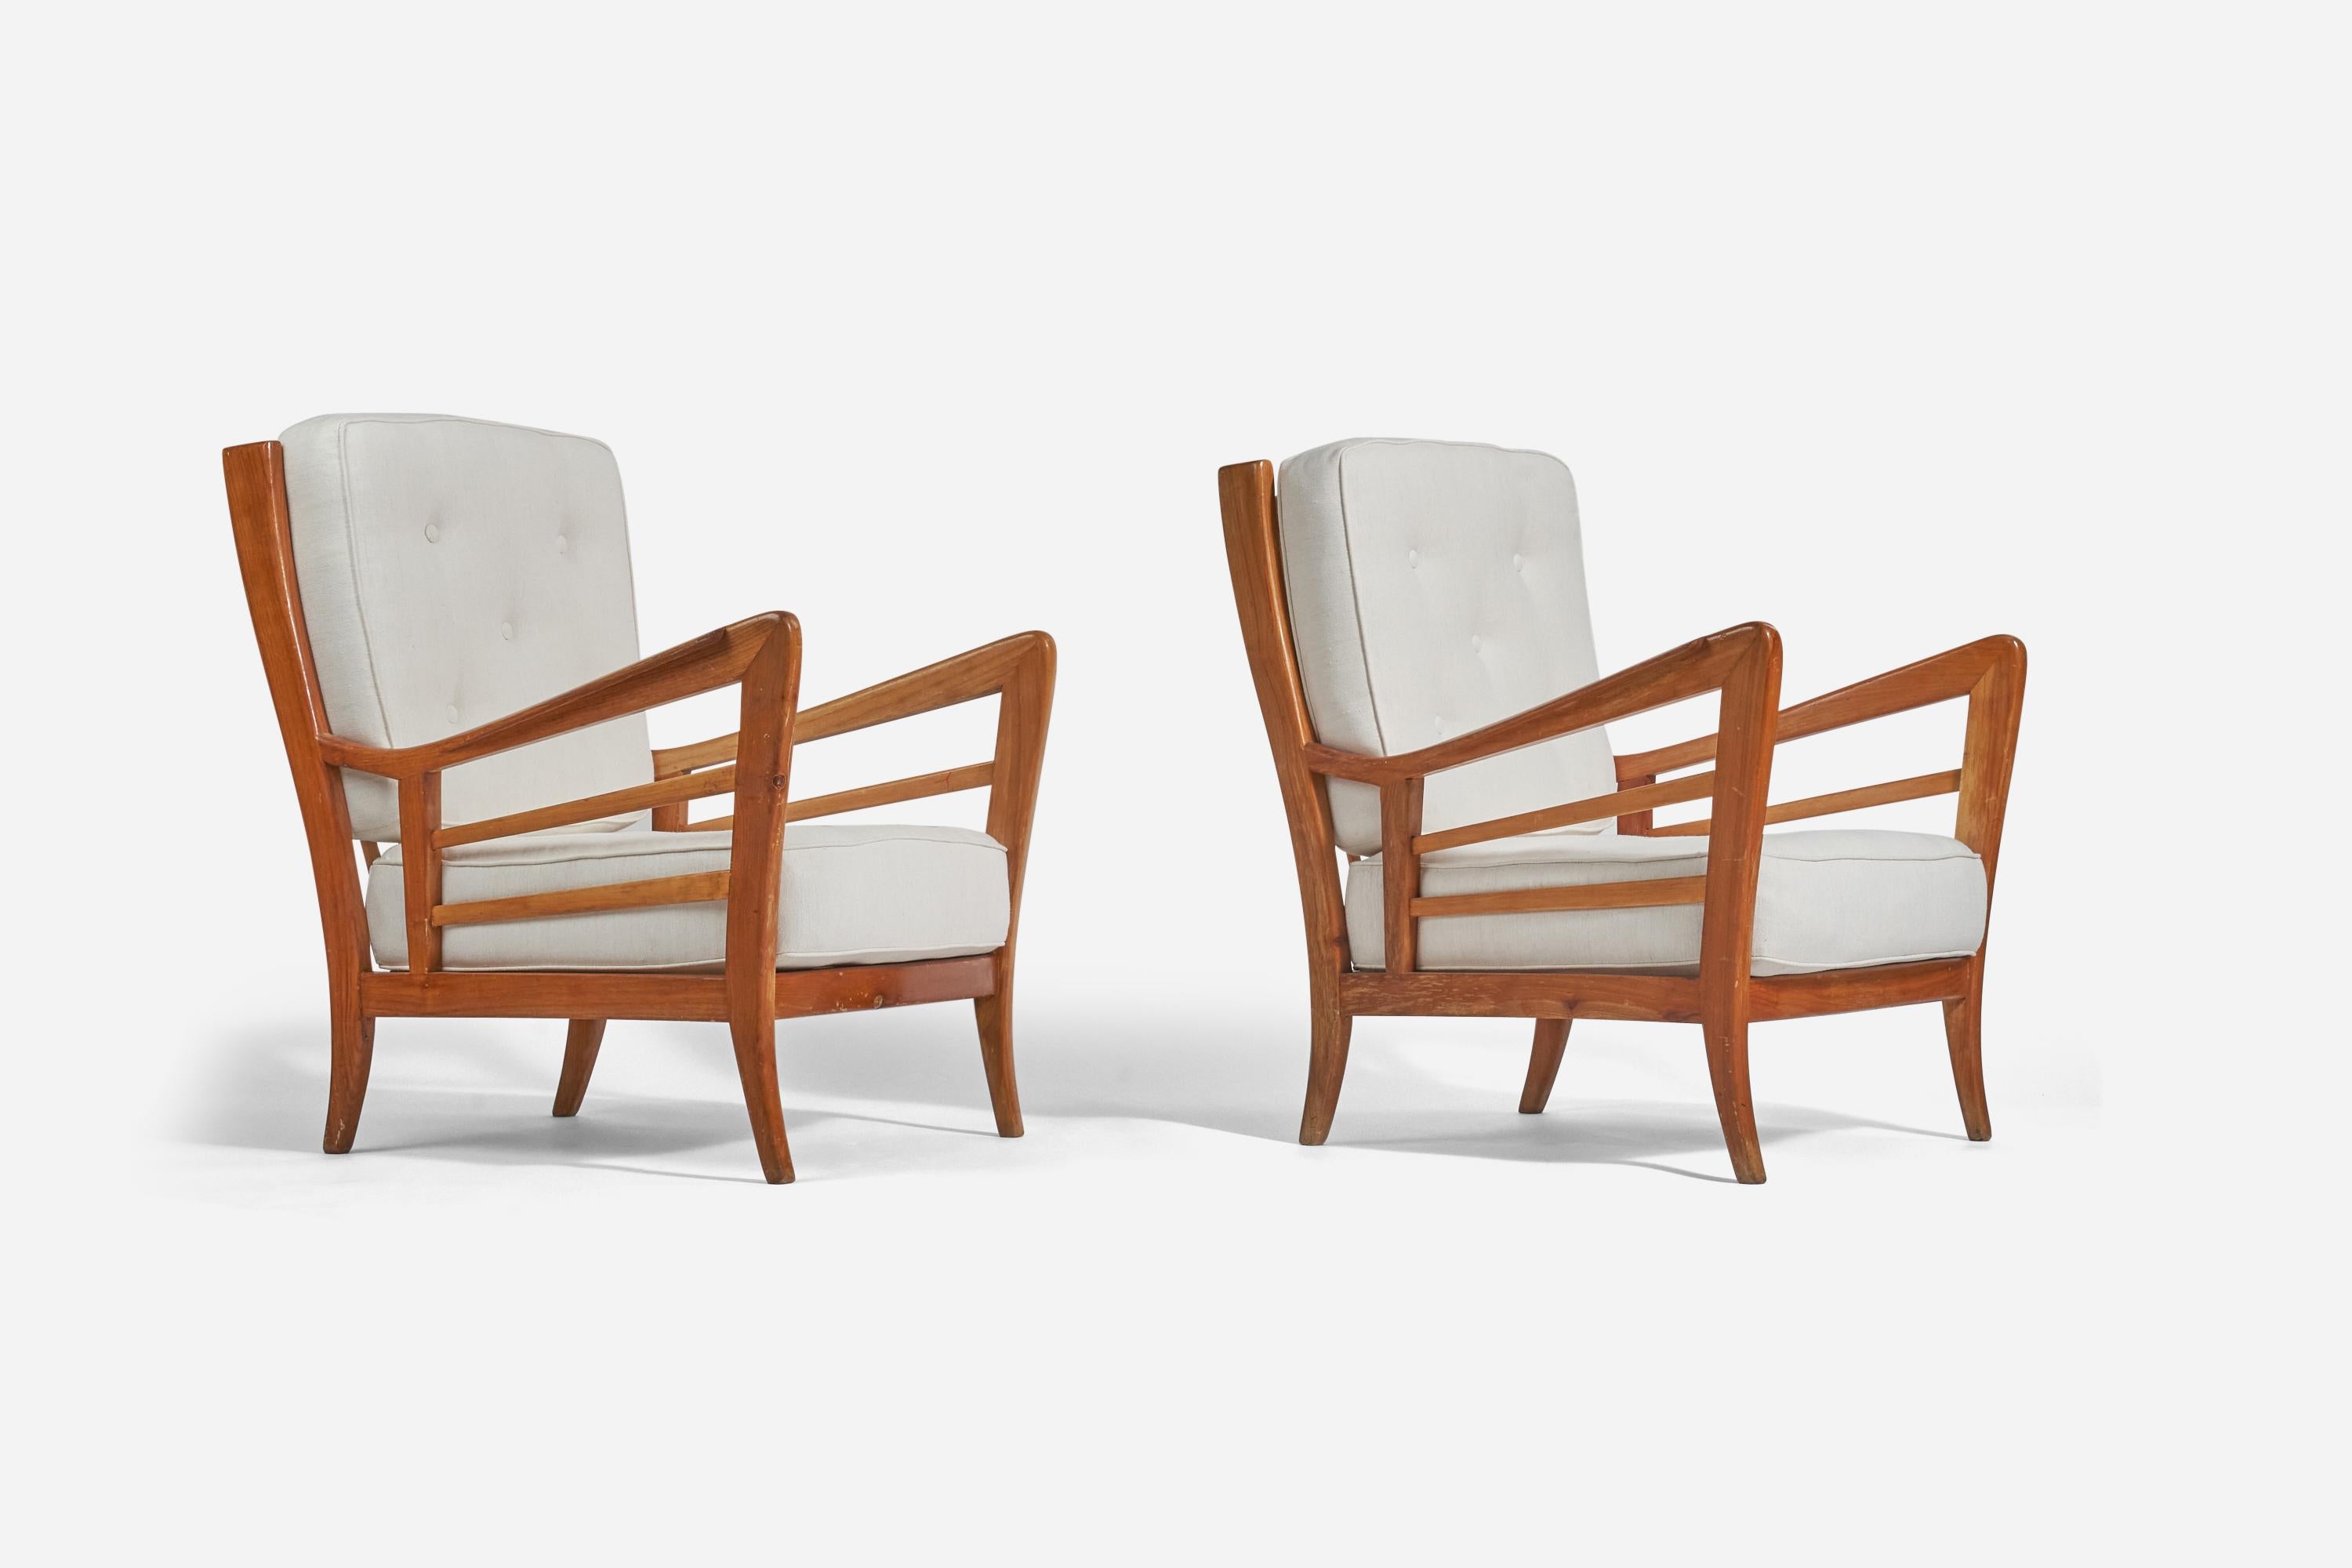 A pair of wood and white fabric lounge chairs; design and production attributed to Paolo Buffa, Italy, 1940s.